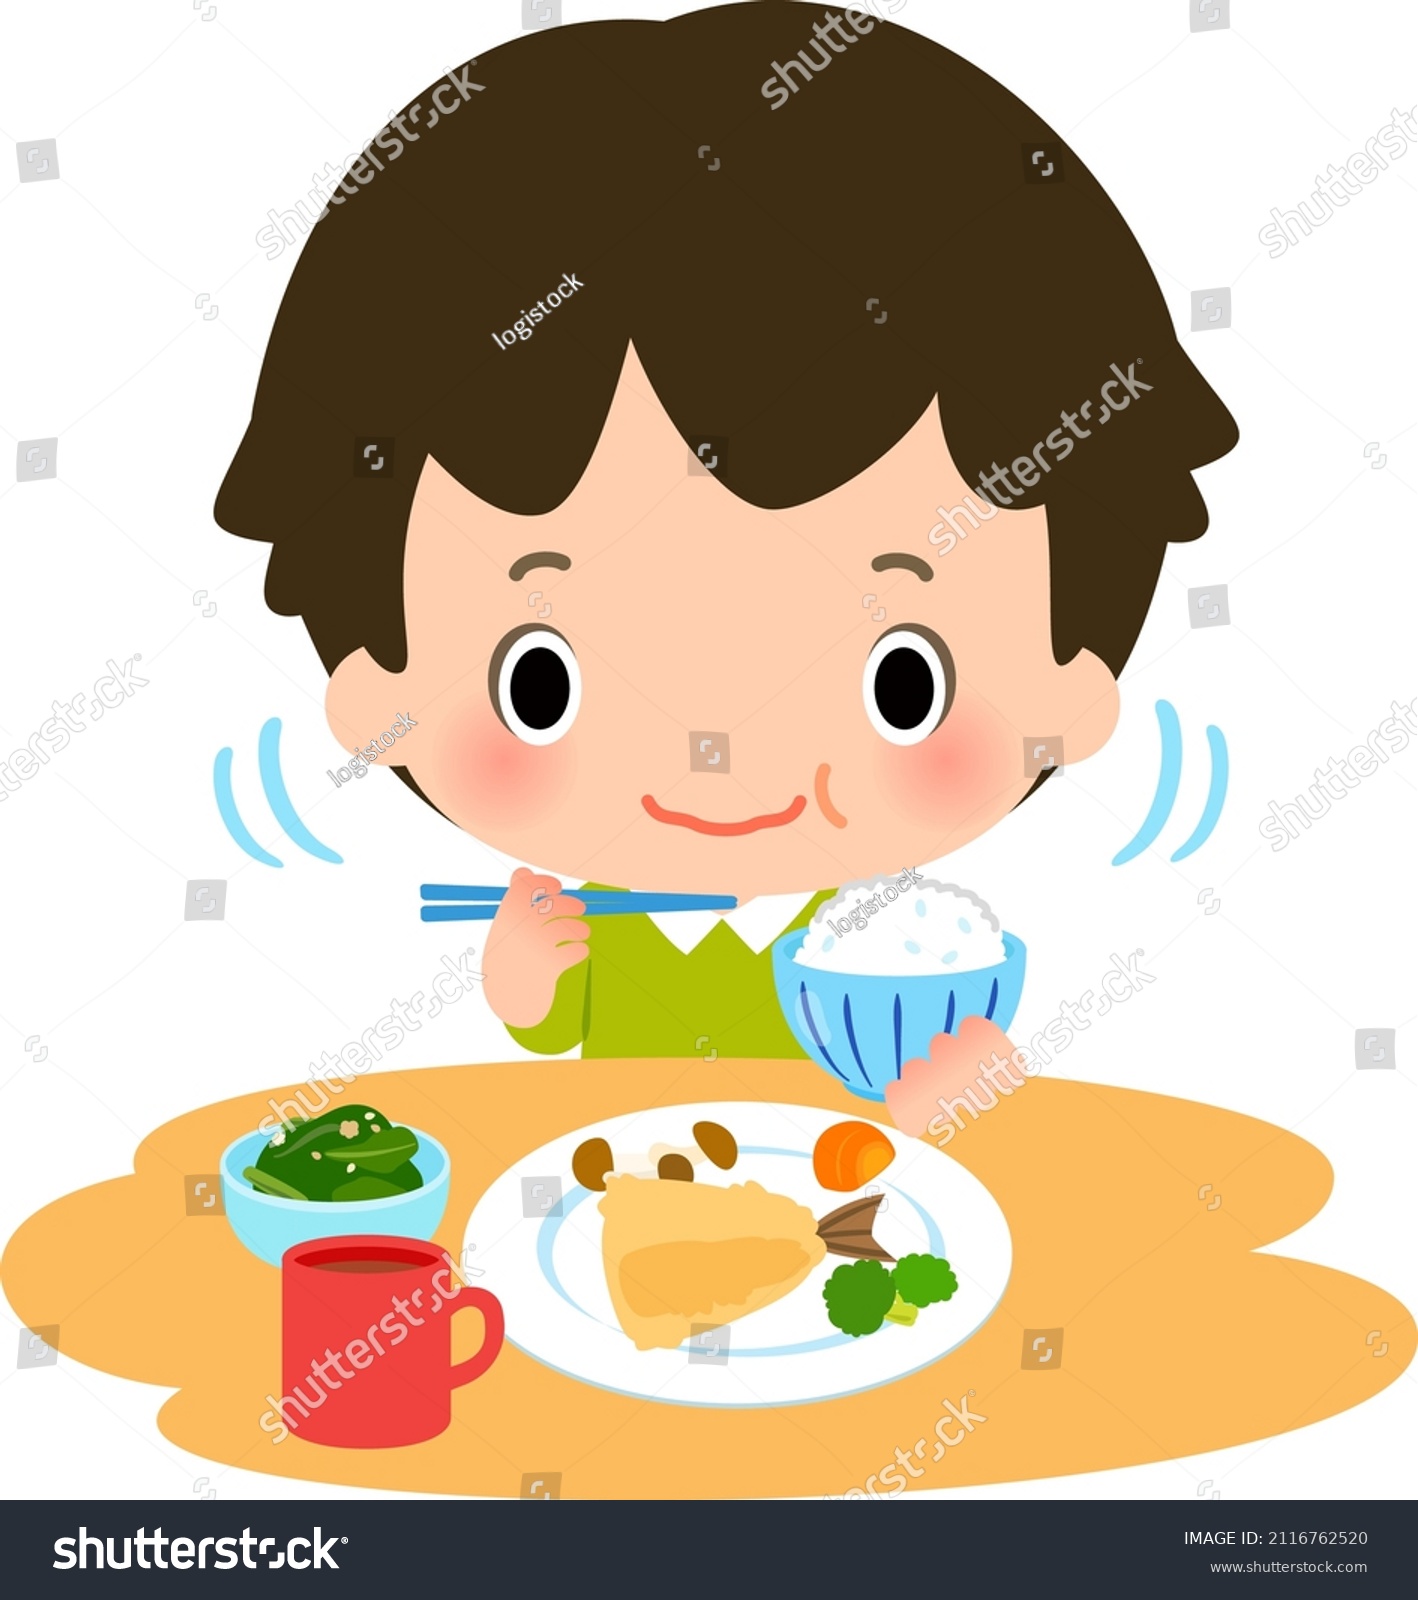 SVG of A boy chewing Jpanese meals well svg